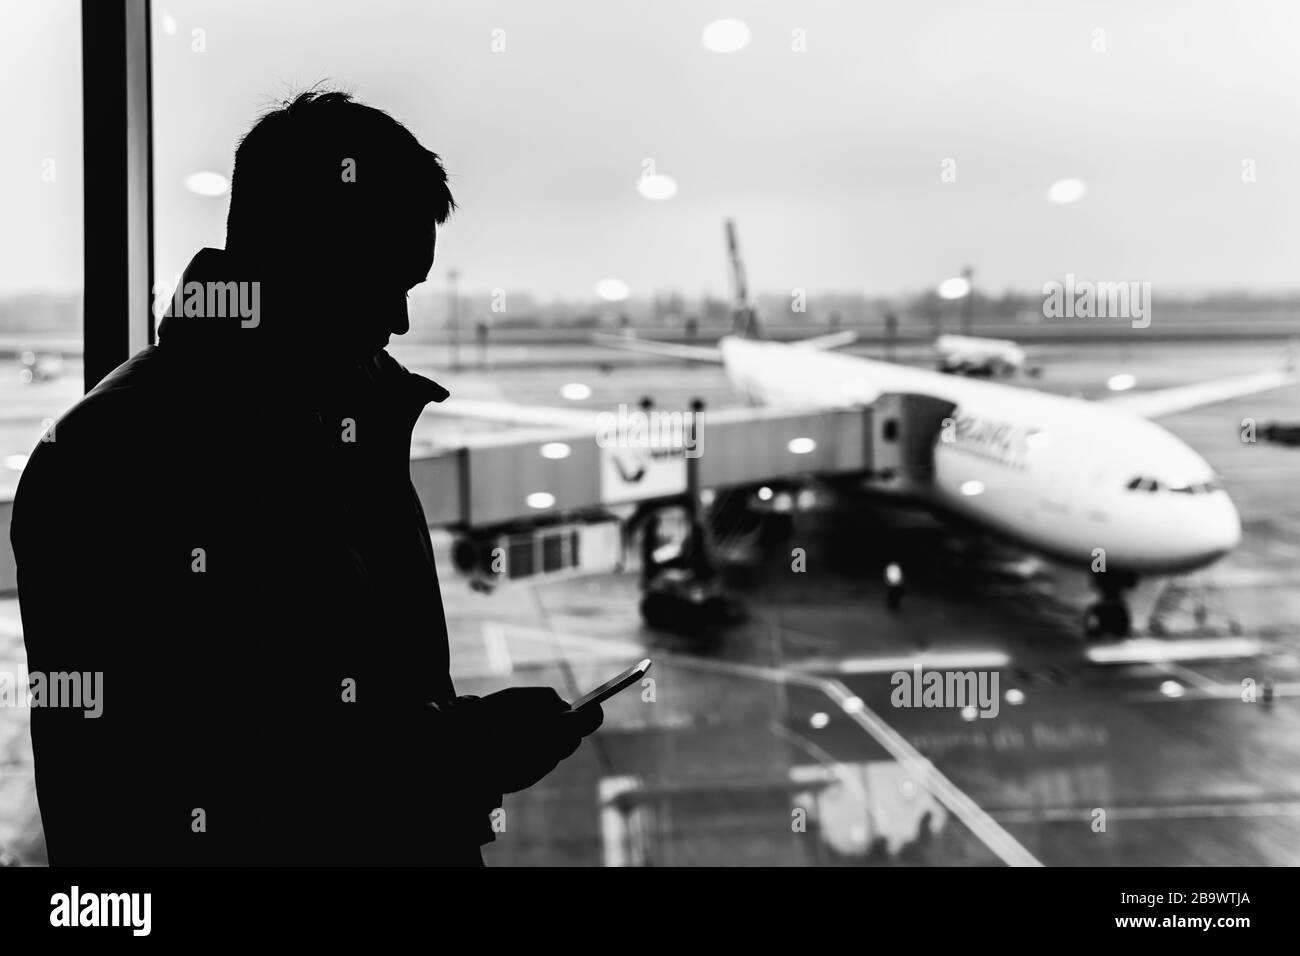 Silhouette of a man at the airport. Man waiting for his flight. Black and white photo. Stock Photo